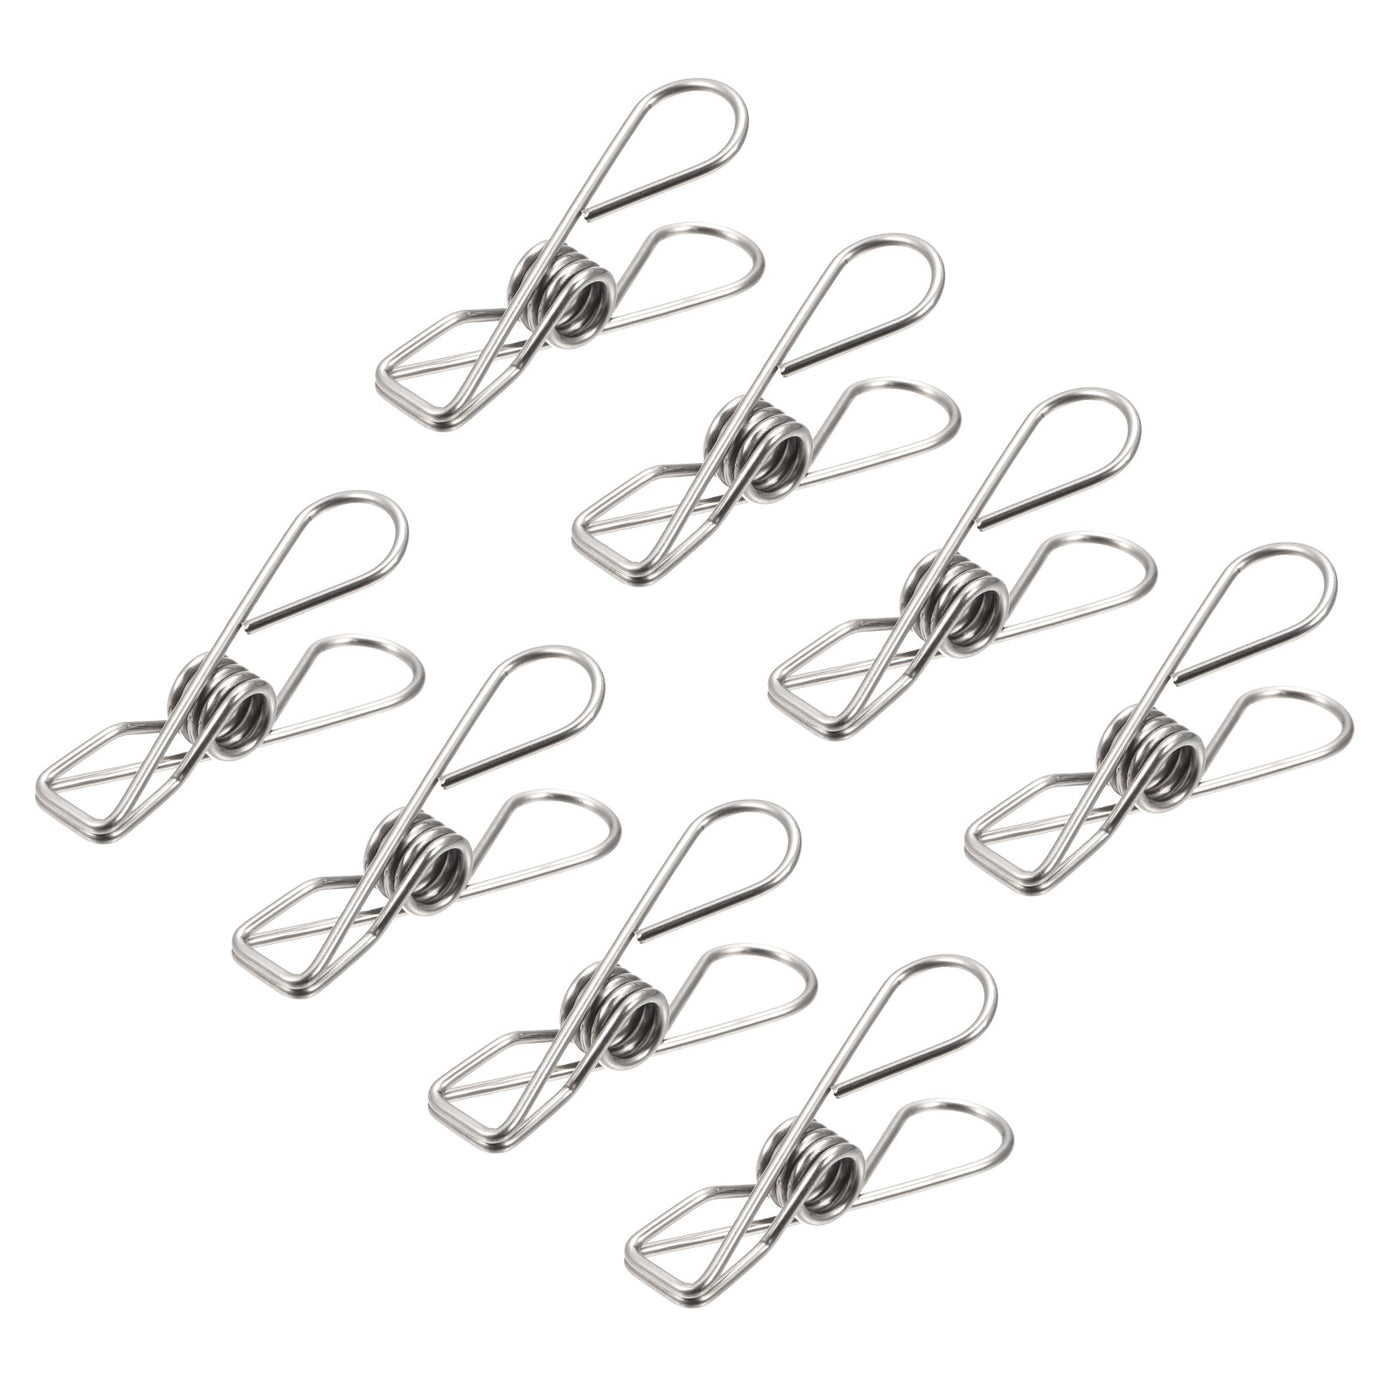 uxcell Uxcell Tablecloth Clips - 50mm Stainless Steel Wire Clamps for Fixing Table Cloth Hanging Clothes, 24 Pcs